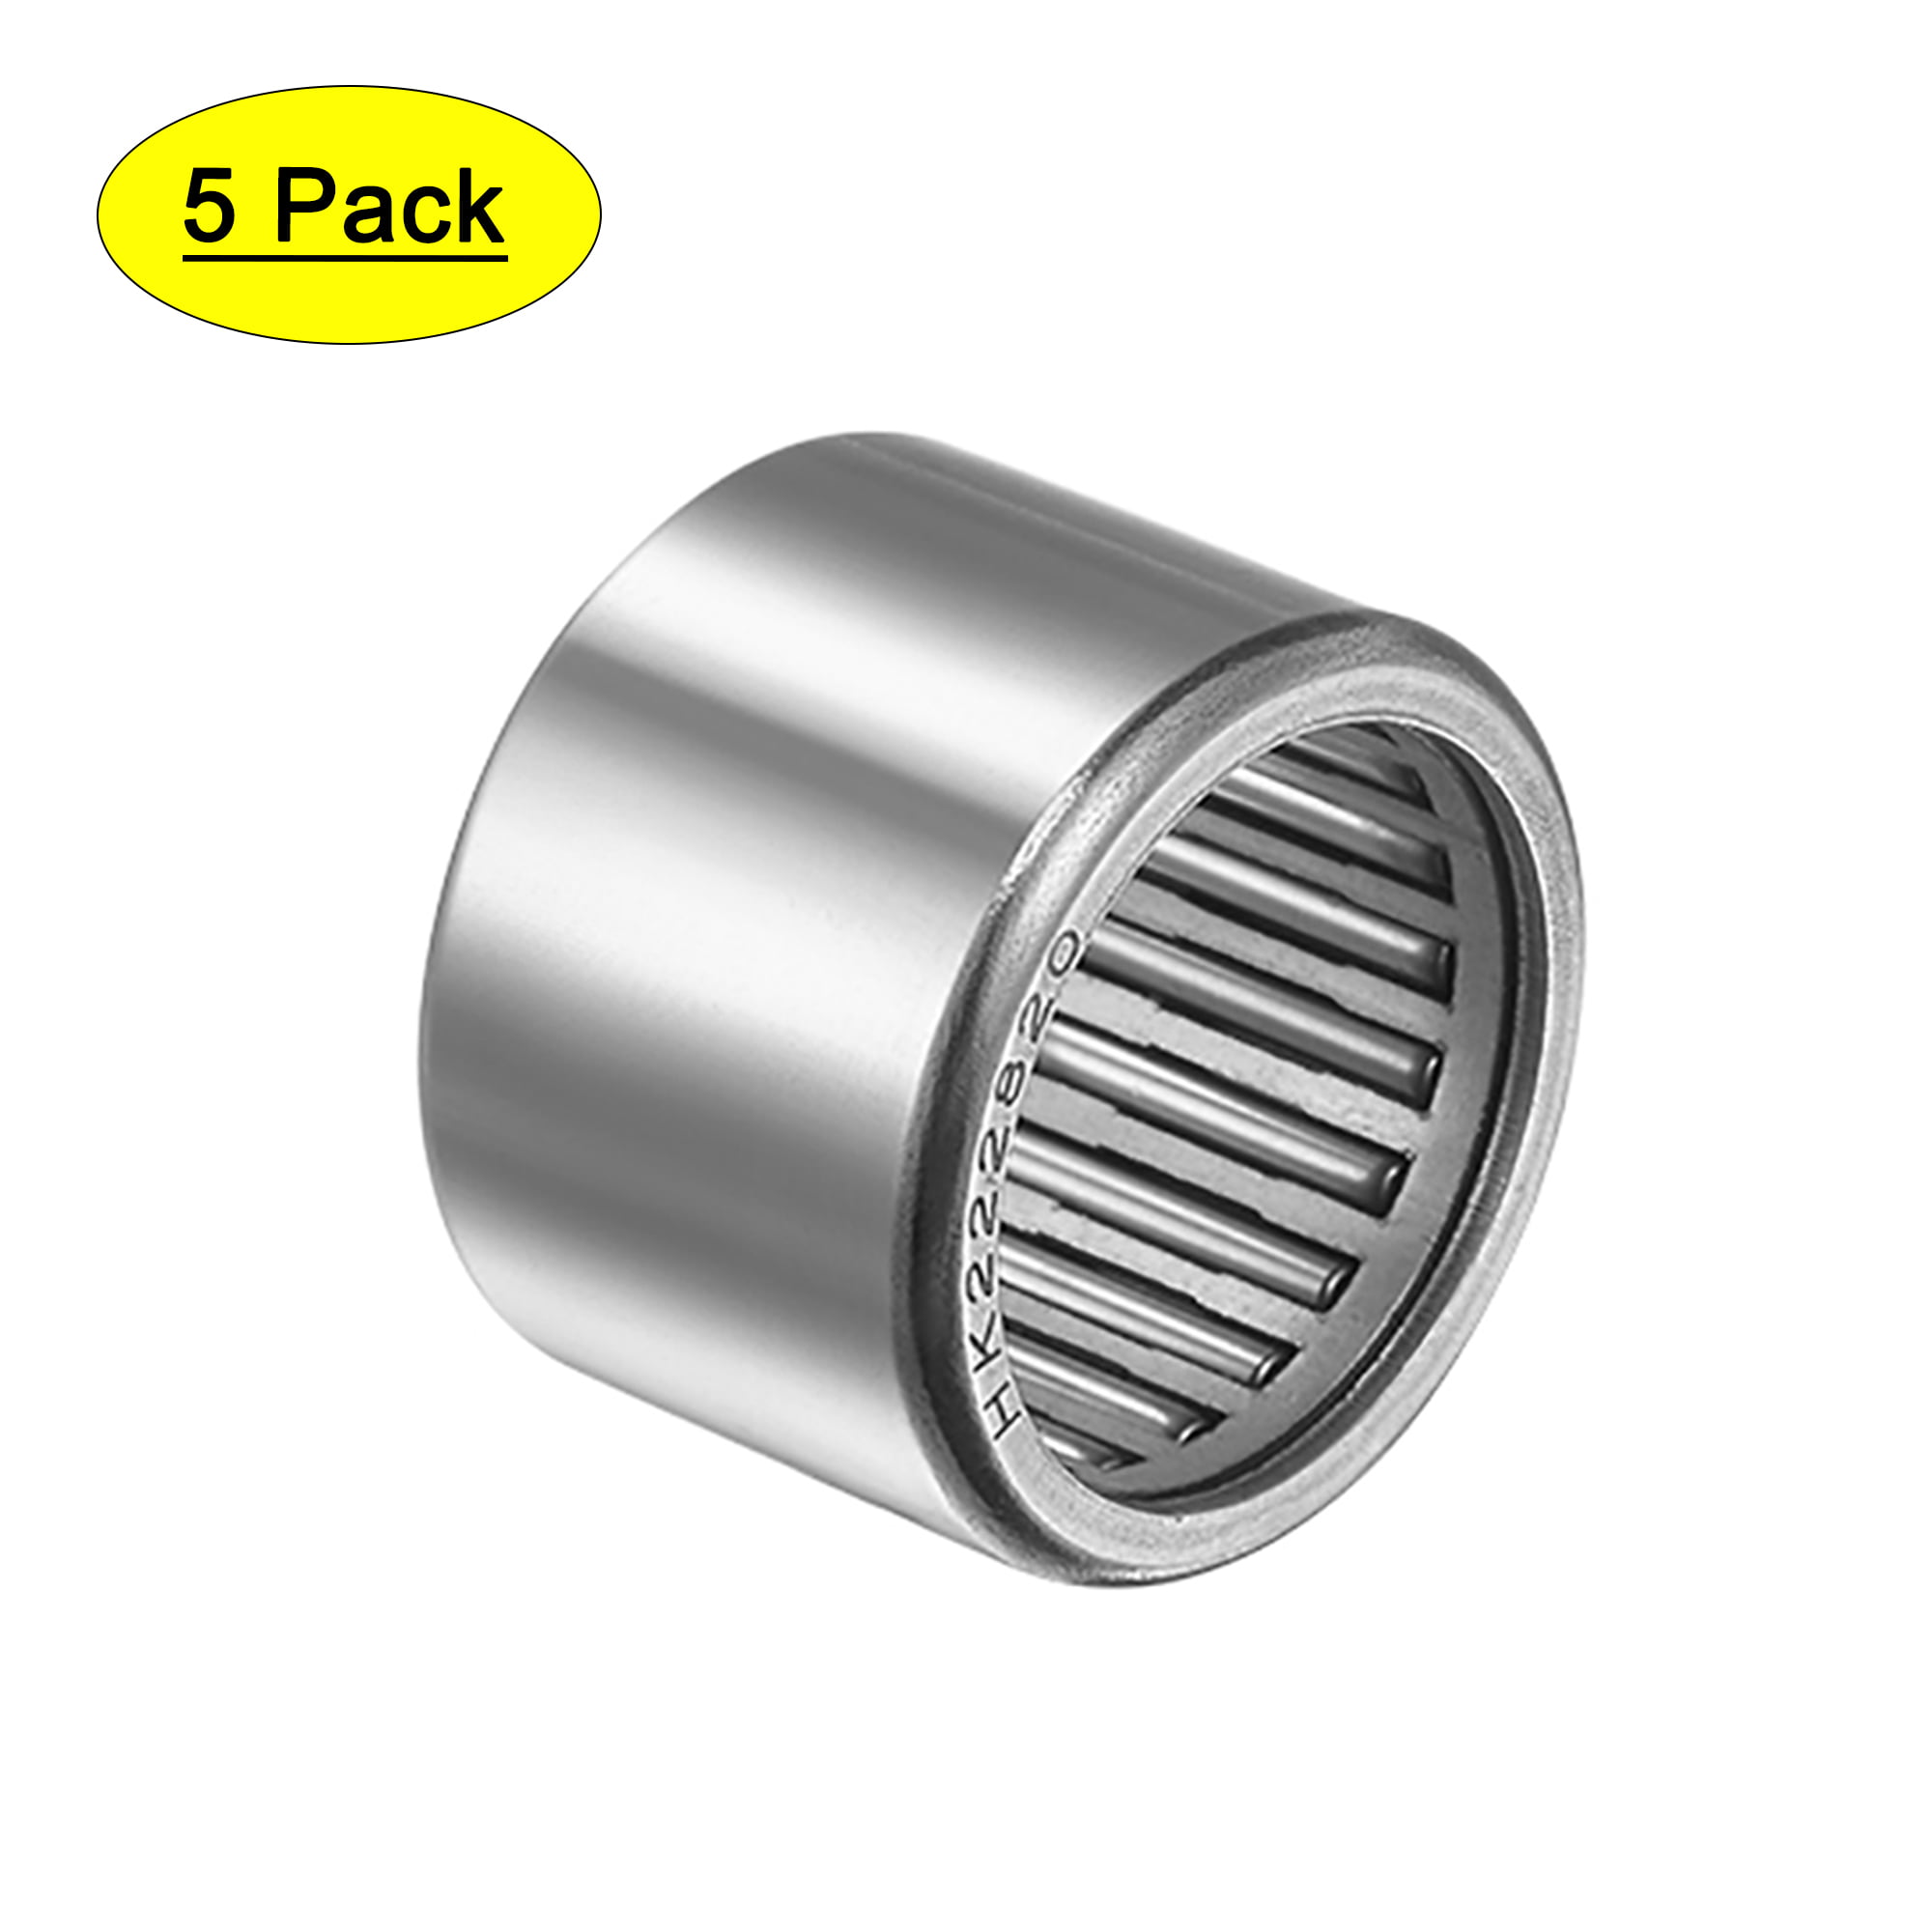 1 x HK2820 DRAWN CUP NEEDLE ROLLER BEARING ID 28mm OD 35mm LENGTH 20mm 